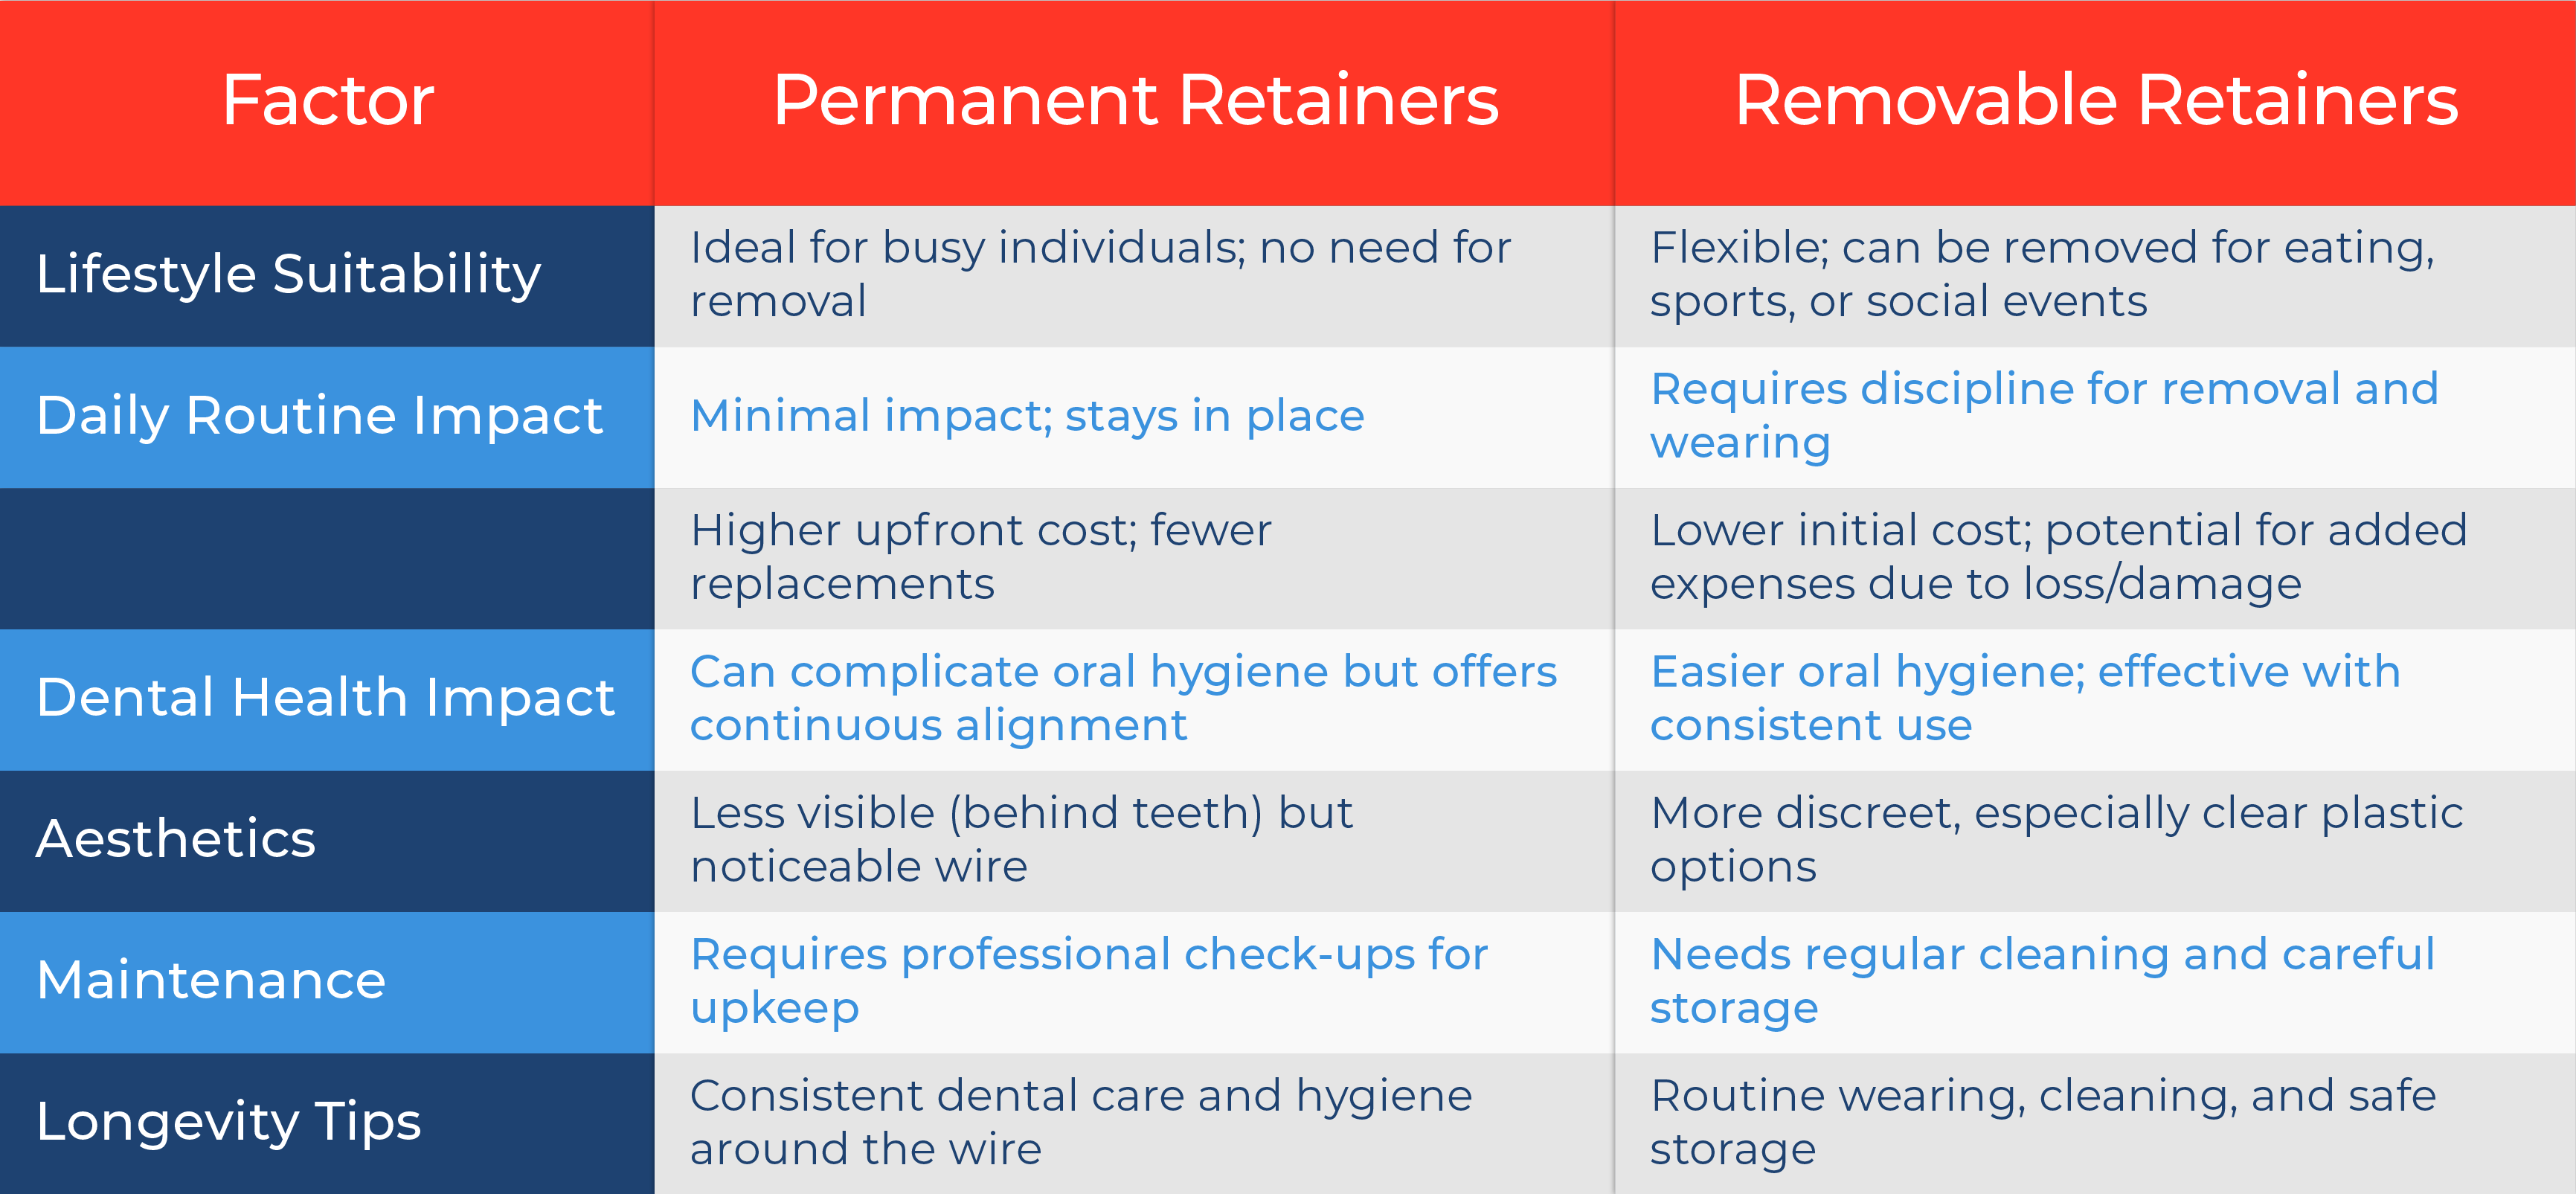 Comparing Permanent and Removable Retainers